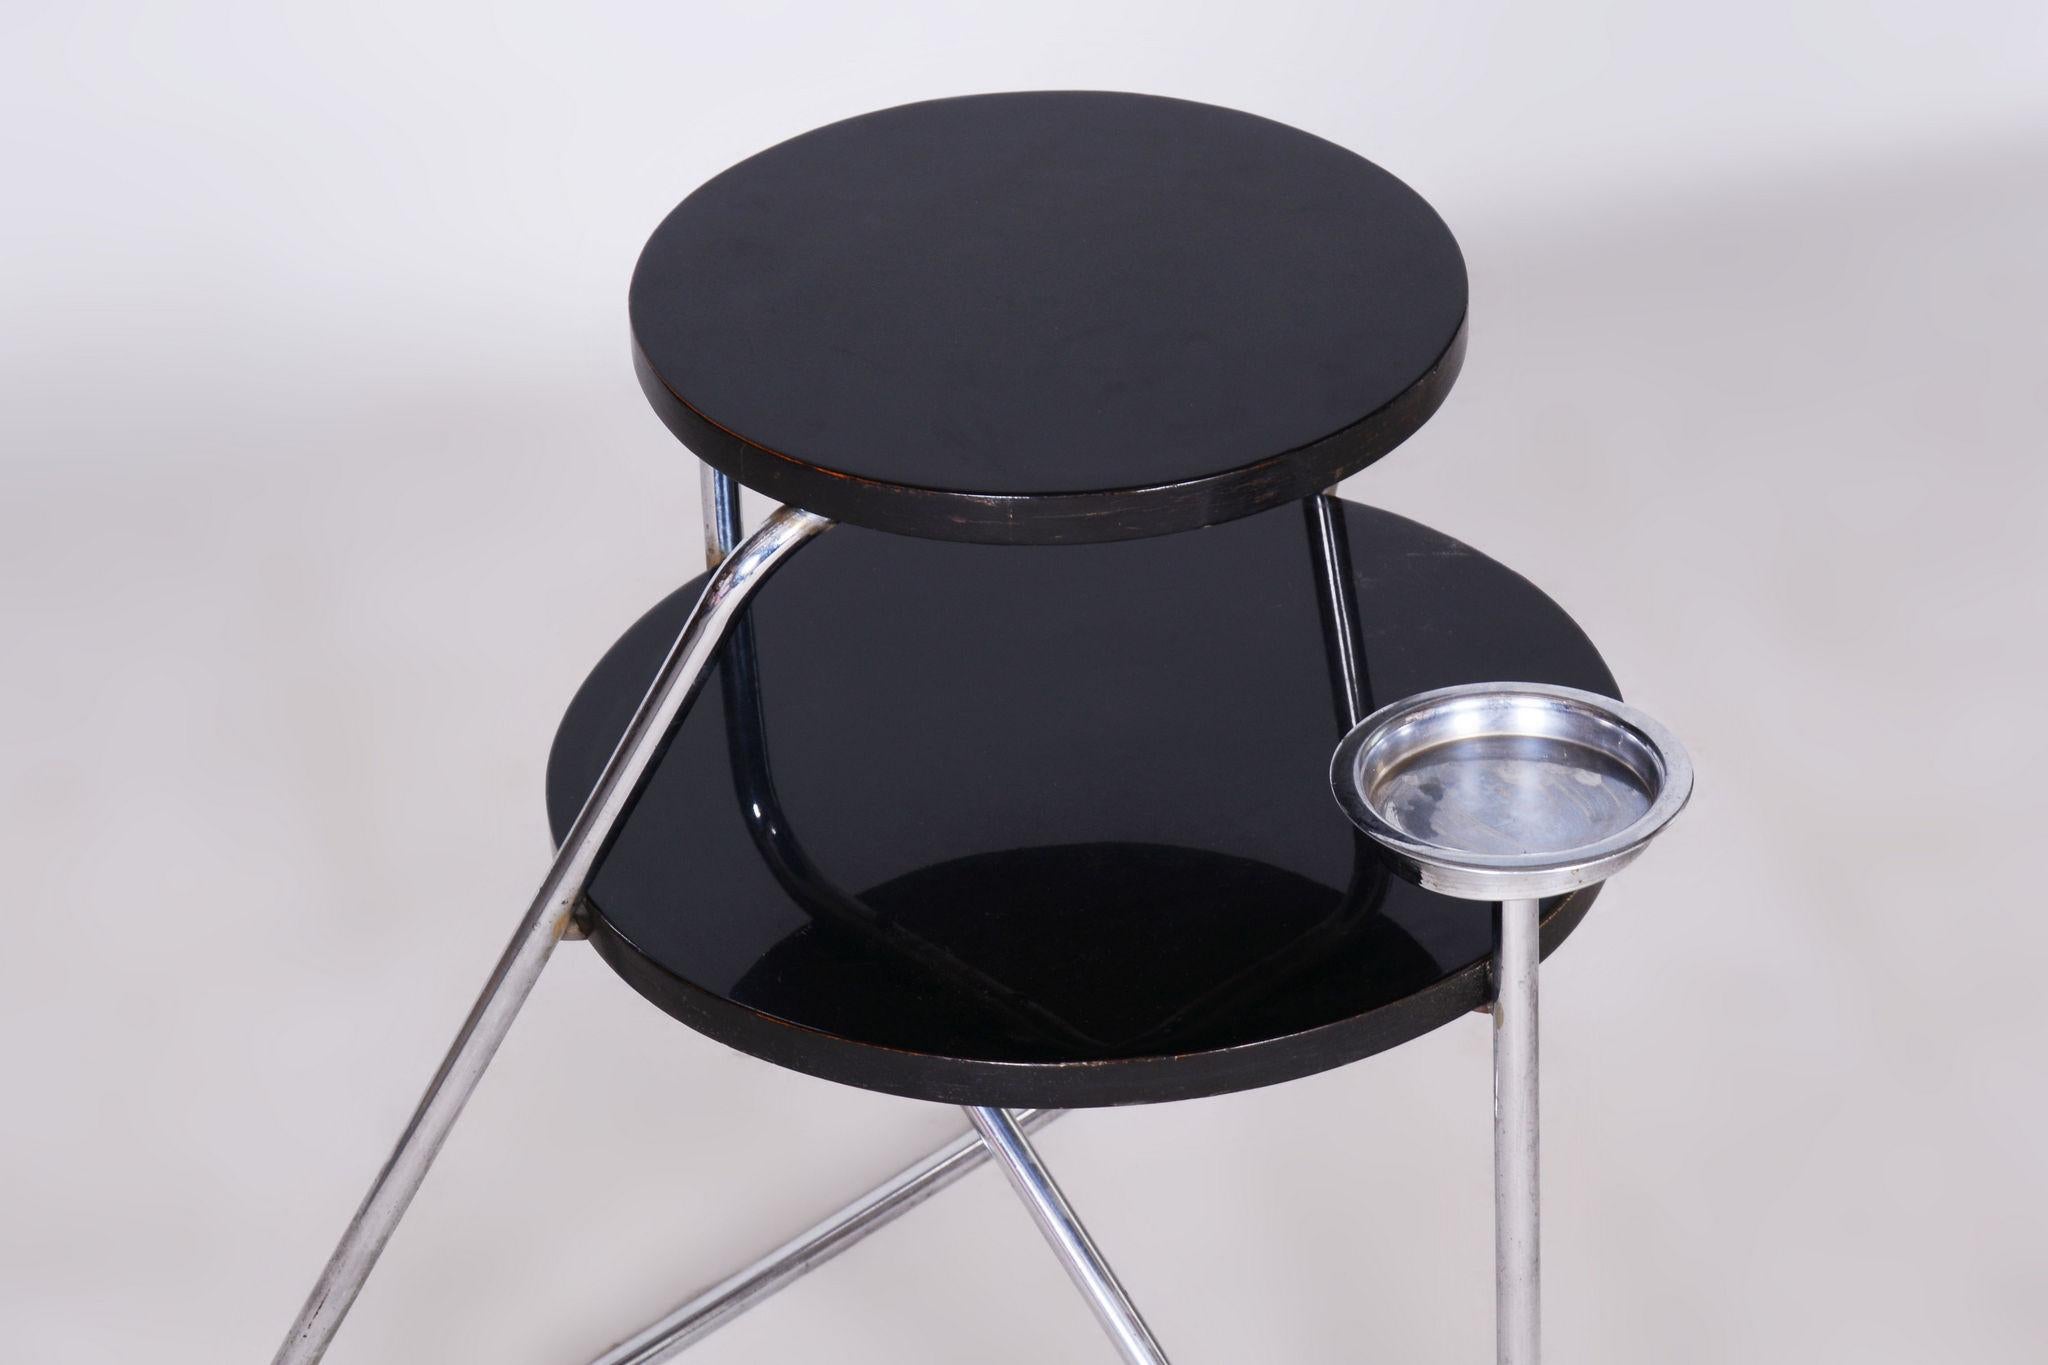 Restored Bauhaus Small Table, Chrome, Revived Polish, Czechia, 1930s For Sale 2